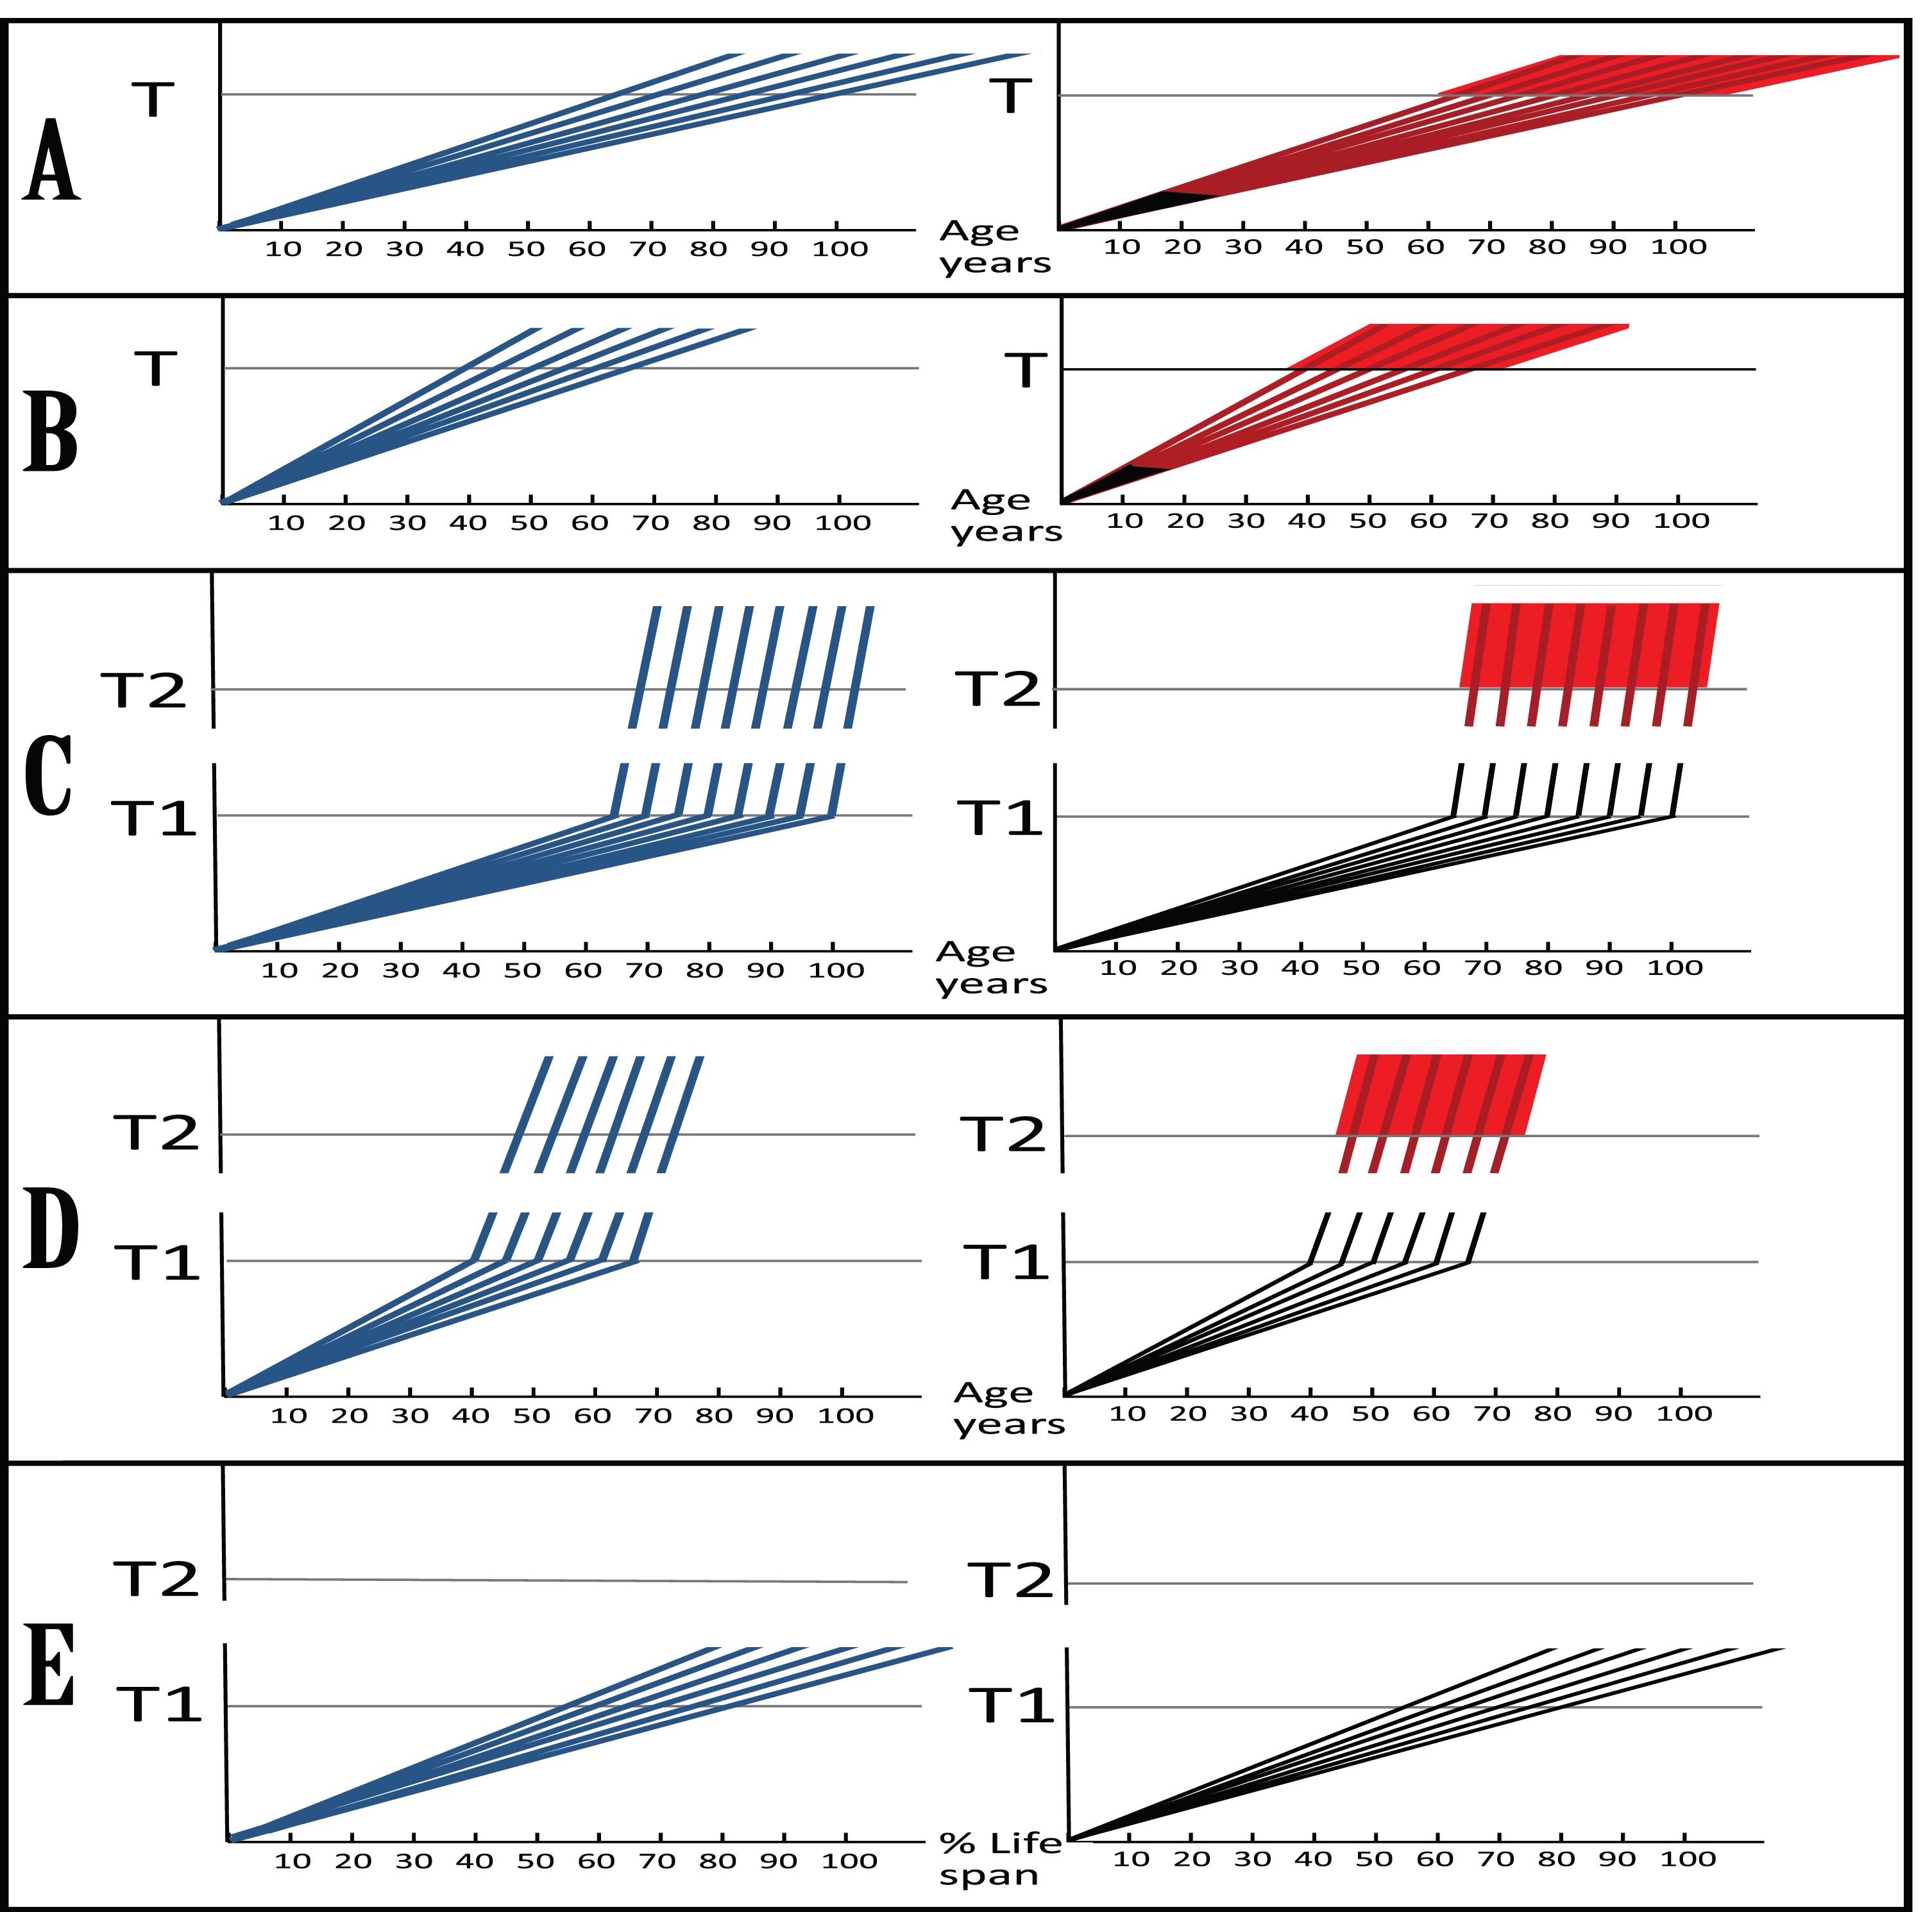 Dynamics of Aβ accumulation and the disease in AD-affected patients: Two paradigms. Images on the left: Dynamics of Aβ accumulation (extracellular in A and B, intraneuronal in C-E); Images on the right: Dynamics of neurodegeneration. Blue lines: Levels of Aβ; Red lines: Extent of neurodegeneration; Black lines: Indicator lines, no noticeable neurodegeneration; Red blocks: Symptomatic manifestation of AD. T: Threshold of extracellular Aβ levels and the corresponding extent of cell damage triggering AD symptoms; T1: Threshold of AβPP-derived iAβ levels required for the activation of the AβPP-independent iAβ production pathway (genetic aspects and epigenetic factors influence the timing of the T and T1 crossings, hence the fanning lines); T2: Threshold of iAβ levels and the corresponding extent of neuronal damage triggering AD symptoms (T, T1, and T2 are patient-specific). A (SAD ), B (FAD): Dynamics of AD in the old paradigm. Levels of extracellular Aβ increase and so does the extent of neurodegeneration; when the T is reached, AD symptoms manifest. C (SAD), D (FAD): Dynamics of AD in the new paradigm. As AβPP-derived iAβ cross the T1, AβPP-independent production of iAβ is activated and its levels rapidly increase. After a lag period during which iAβ further accumulates, neurodegeneration commences; when the T2 is reached, AD symptoms manifest. Red and blue lines over the T1 threshold are shown arbitrarily as parallel (i.e., identical rates of the accumulation of iAβ produced independently of AβPP and of the corresponding extent of cellular damage) and as of uniform heights over the T2 threshold (i.e., equal extents of damage); in reality, both the rates and the extents and, accordingly, lines’ angles and their heights over the T2 are likely different and define the duration of the disease in individual AD patients. E: Presumed dynamics of iAβ accumulation in subjects with an inoperative AD Engine. AβPP-derived iAβ levels cross the T1 threshold but the AβPP-independent iAβ production pathway is not activated. Neither neurodegeneration-triggering iAβ levels nor the T2 threshold are reached; there is no noticeable neurodegeneration, no AD symptoms manifest, no disease occurs.